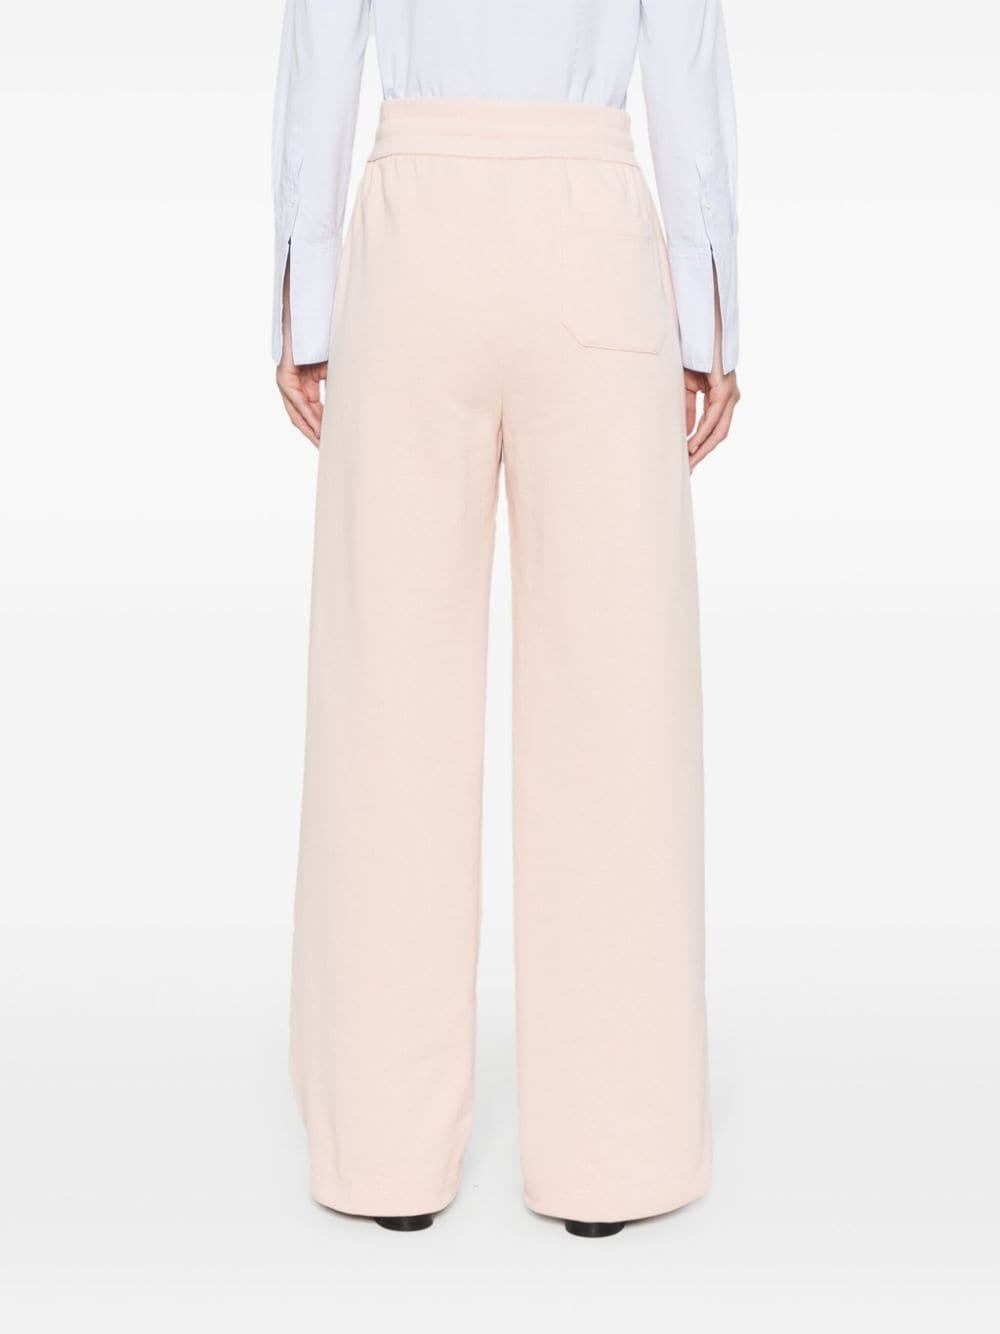 Light Pink High-Waisted Cotton Sweatpants with Signature G Logo by Gucci